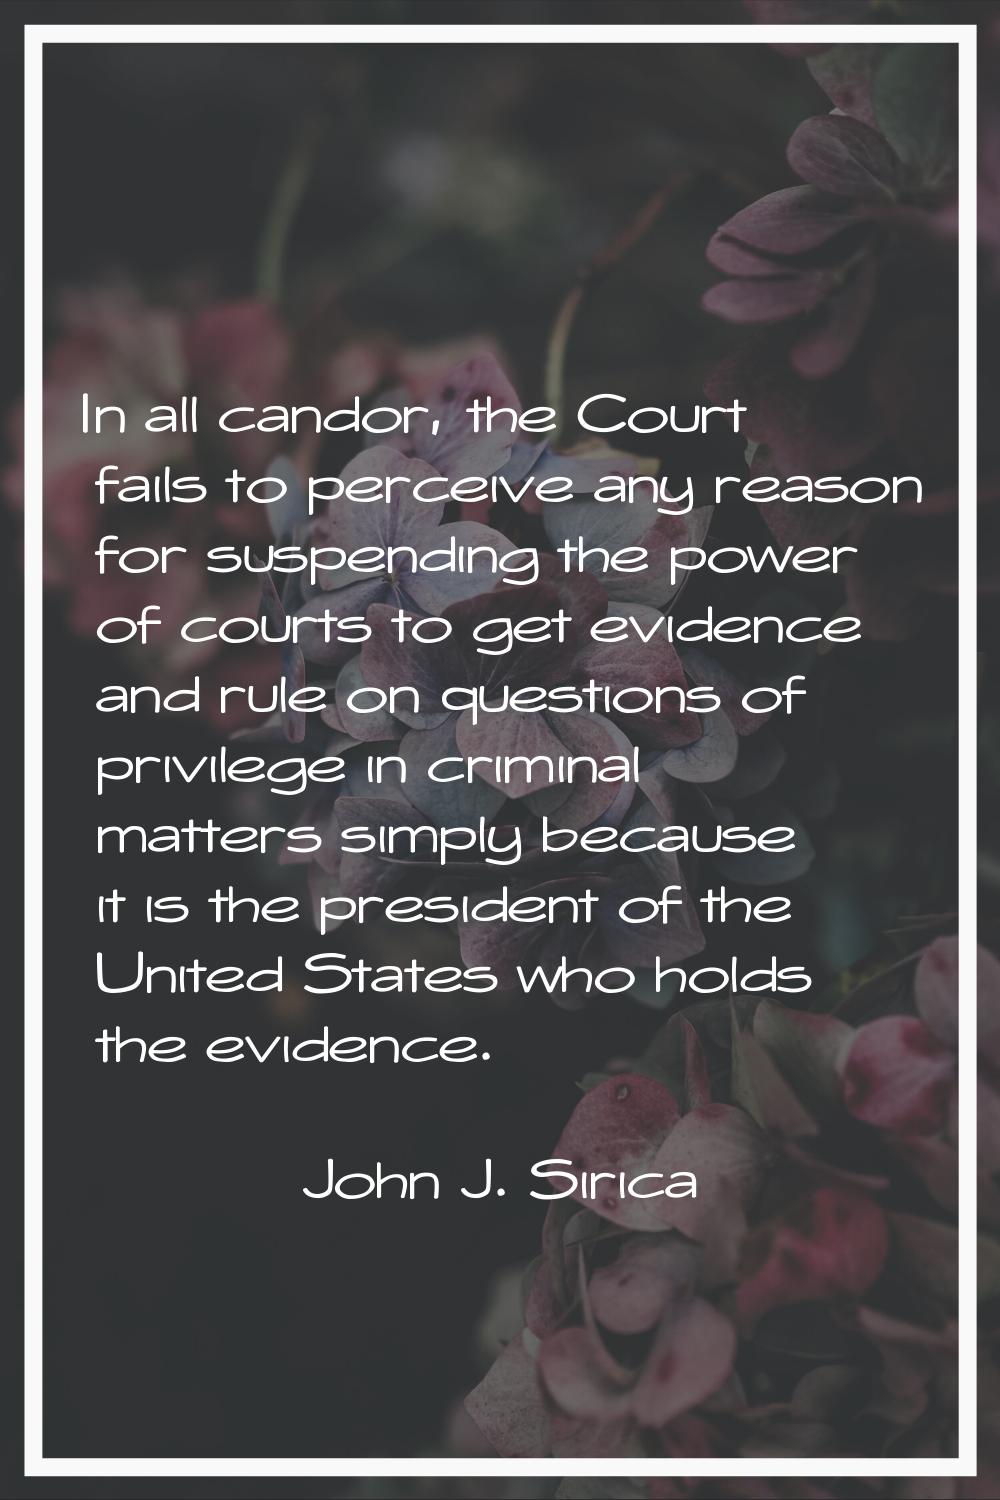 In all candor, the Court fails to perceive any reason for suspending the power of courts to get evi